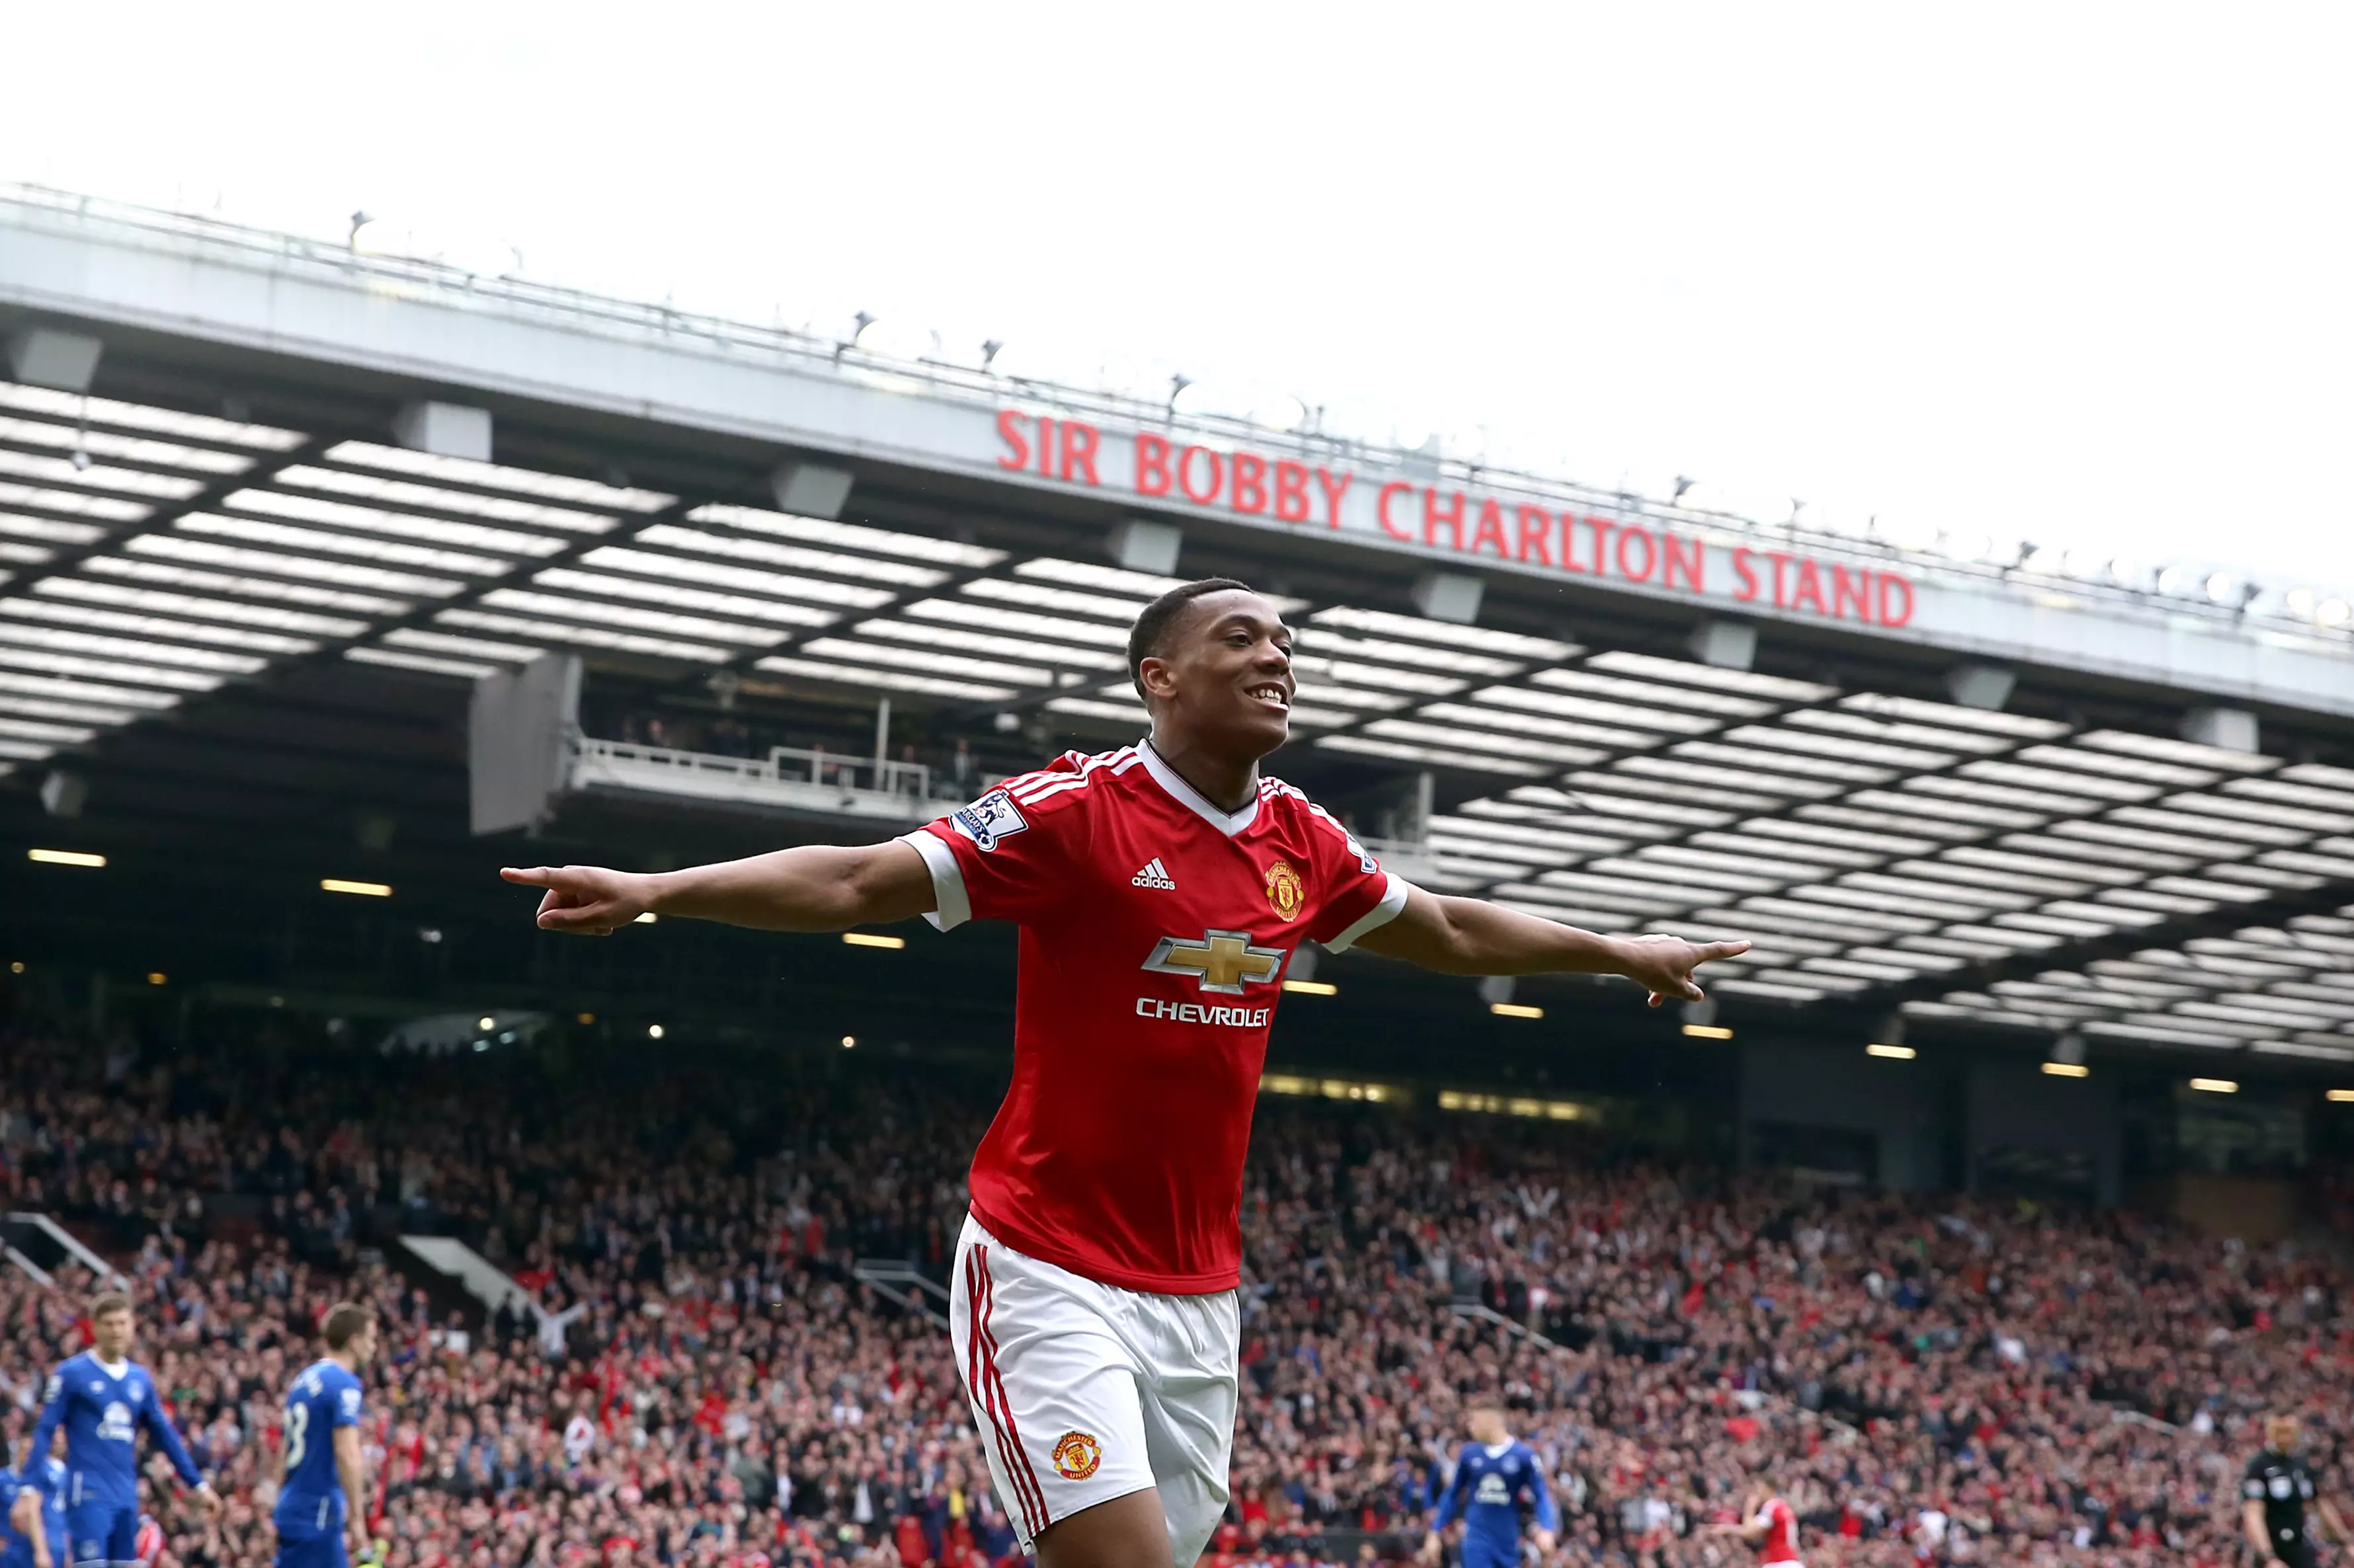 Martial enjoyed a flying start at Old Trafford. Image: PA Images.